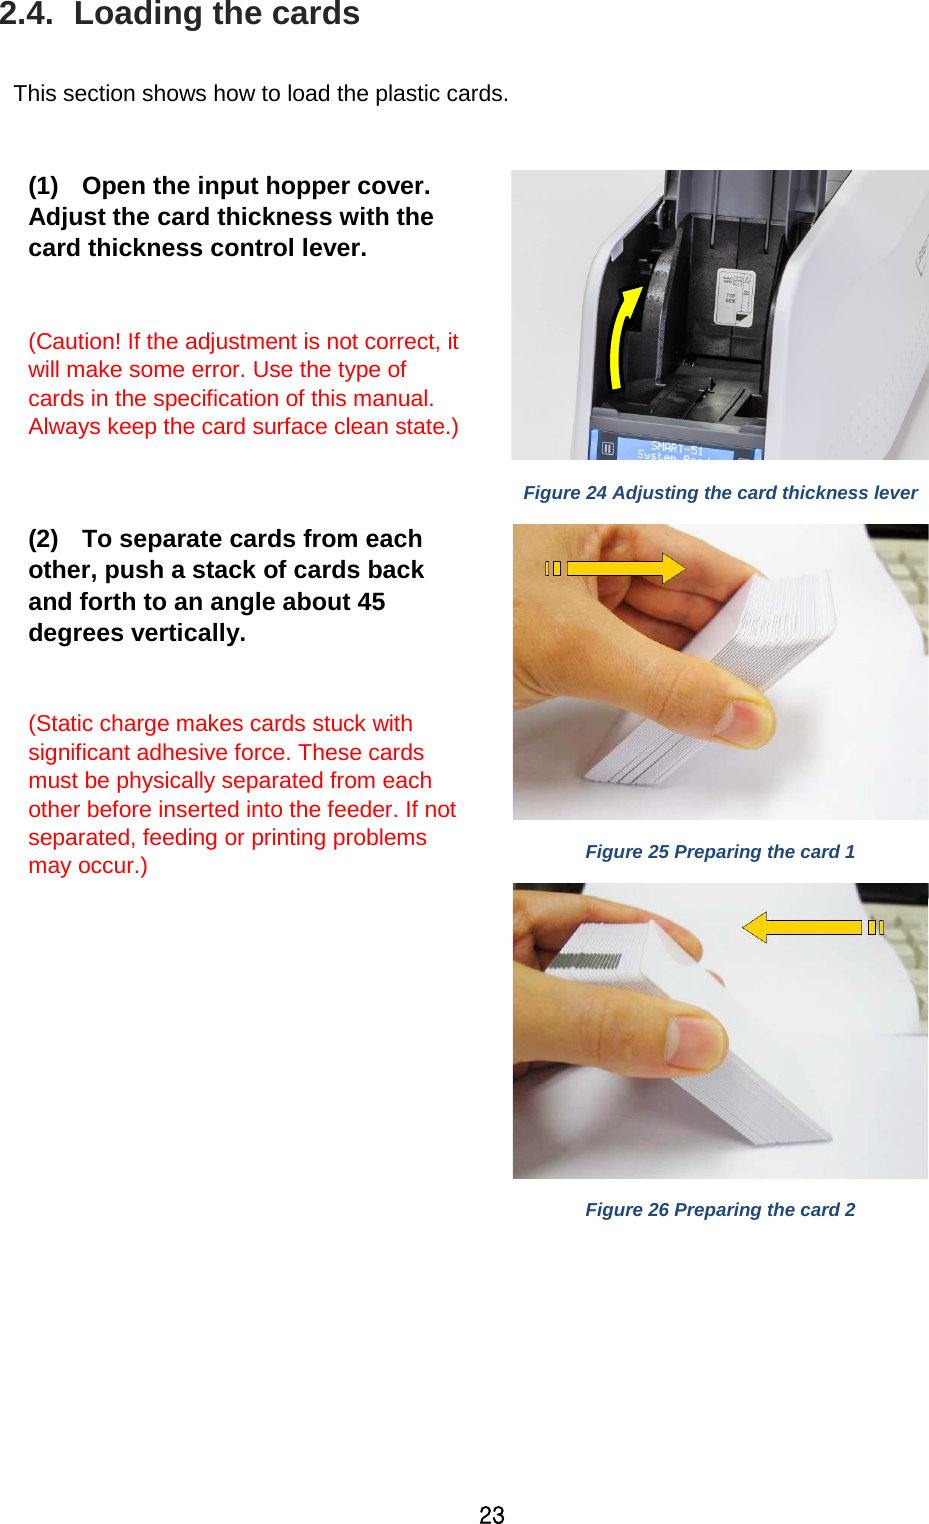 23 2.4.  Loading the cards  This section shows how to load the plastic cards.  (1) Open the input hopper cover. Adjust the card thickness with the card thickness control lever.  (Caution! If the adjustment is not correct, it will make some error. Use the type of cards in the specification of this manual. Always keep the card surface clean state.)   Figure 24 Adjusting the card thickness lever (2) To separate cards from each other, push a stack of cards back and forth to an angle about 45 degrees vertically.  (Static charge makes cards stuck with significant adhesive force. These cards must be physically separated from each other before inserted into the feeder. If not separated, feeding or printing problems may occur.)      Figure 25 Preparing the card 1  Figure 26 Preparing the card 2 